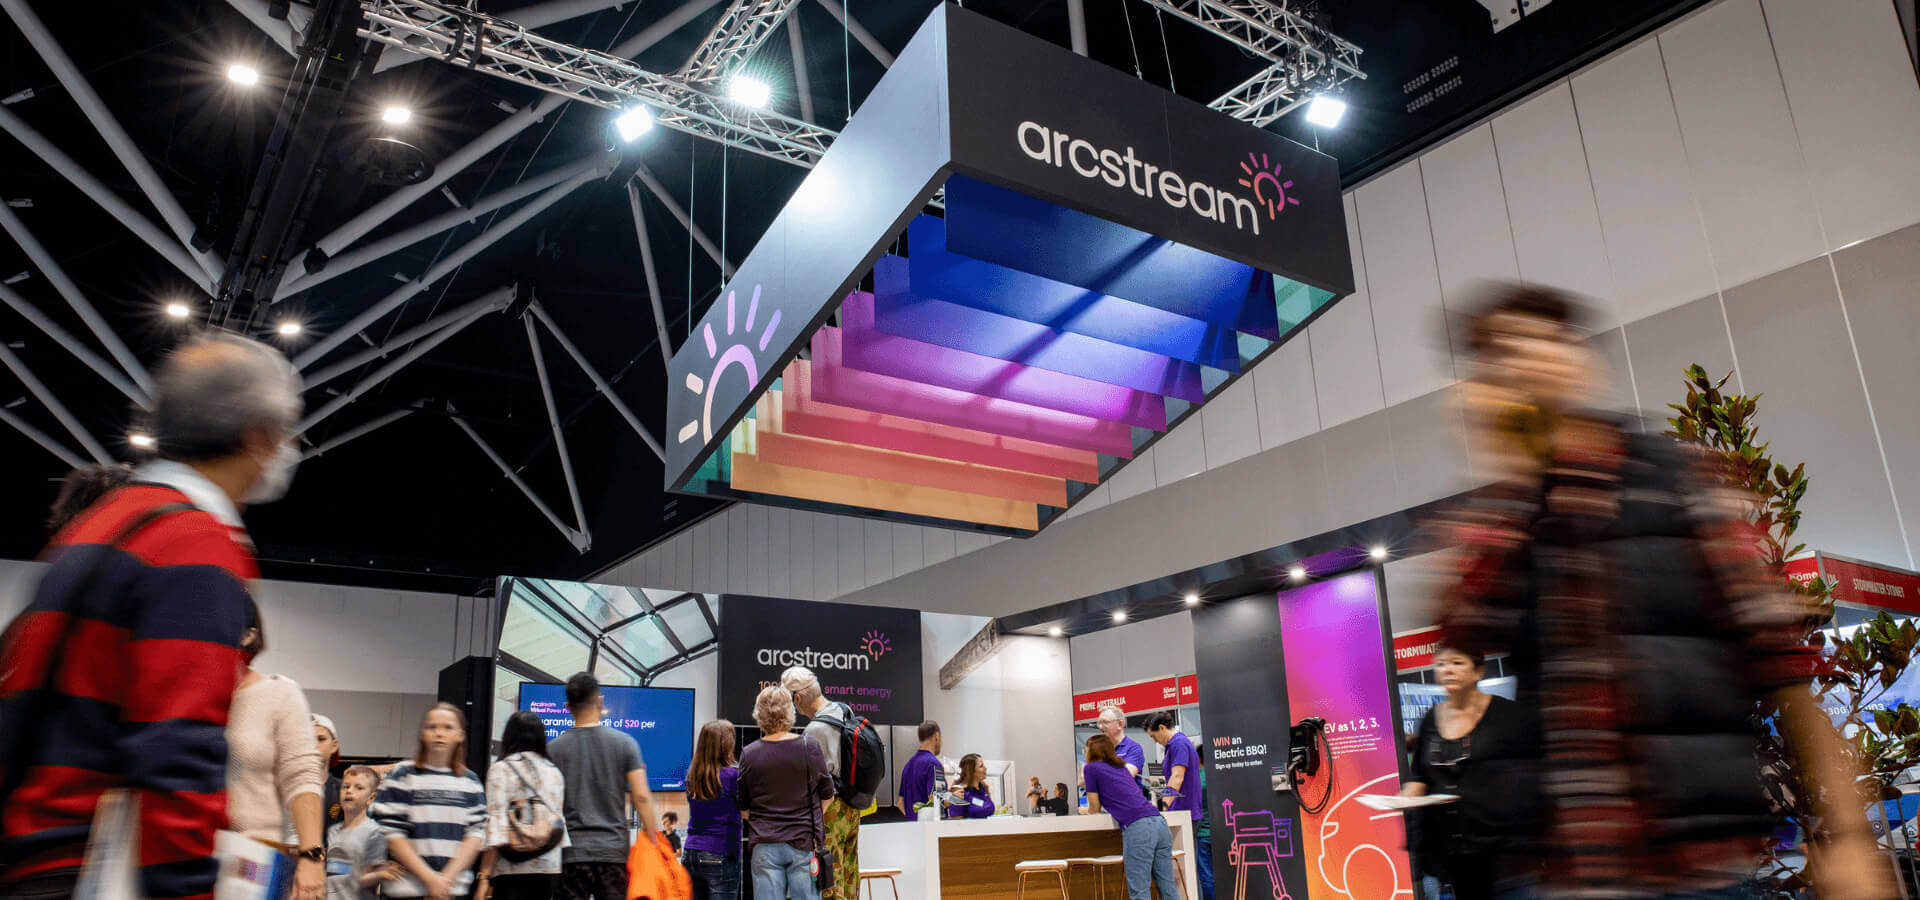 Arcstream by Qcells at the Sydney Home Show